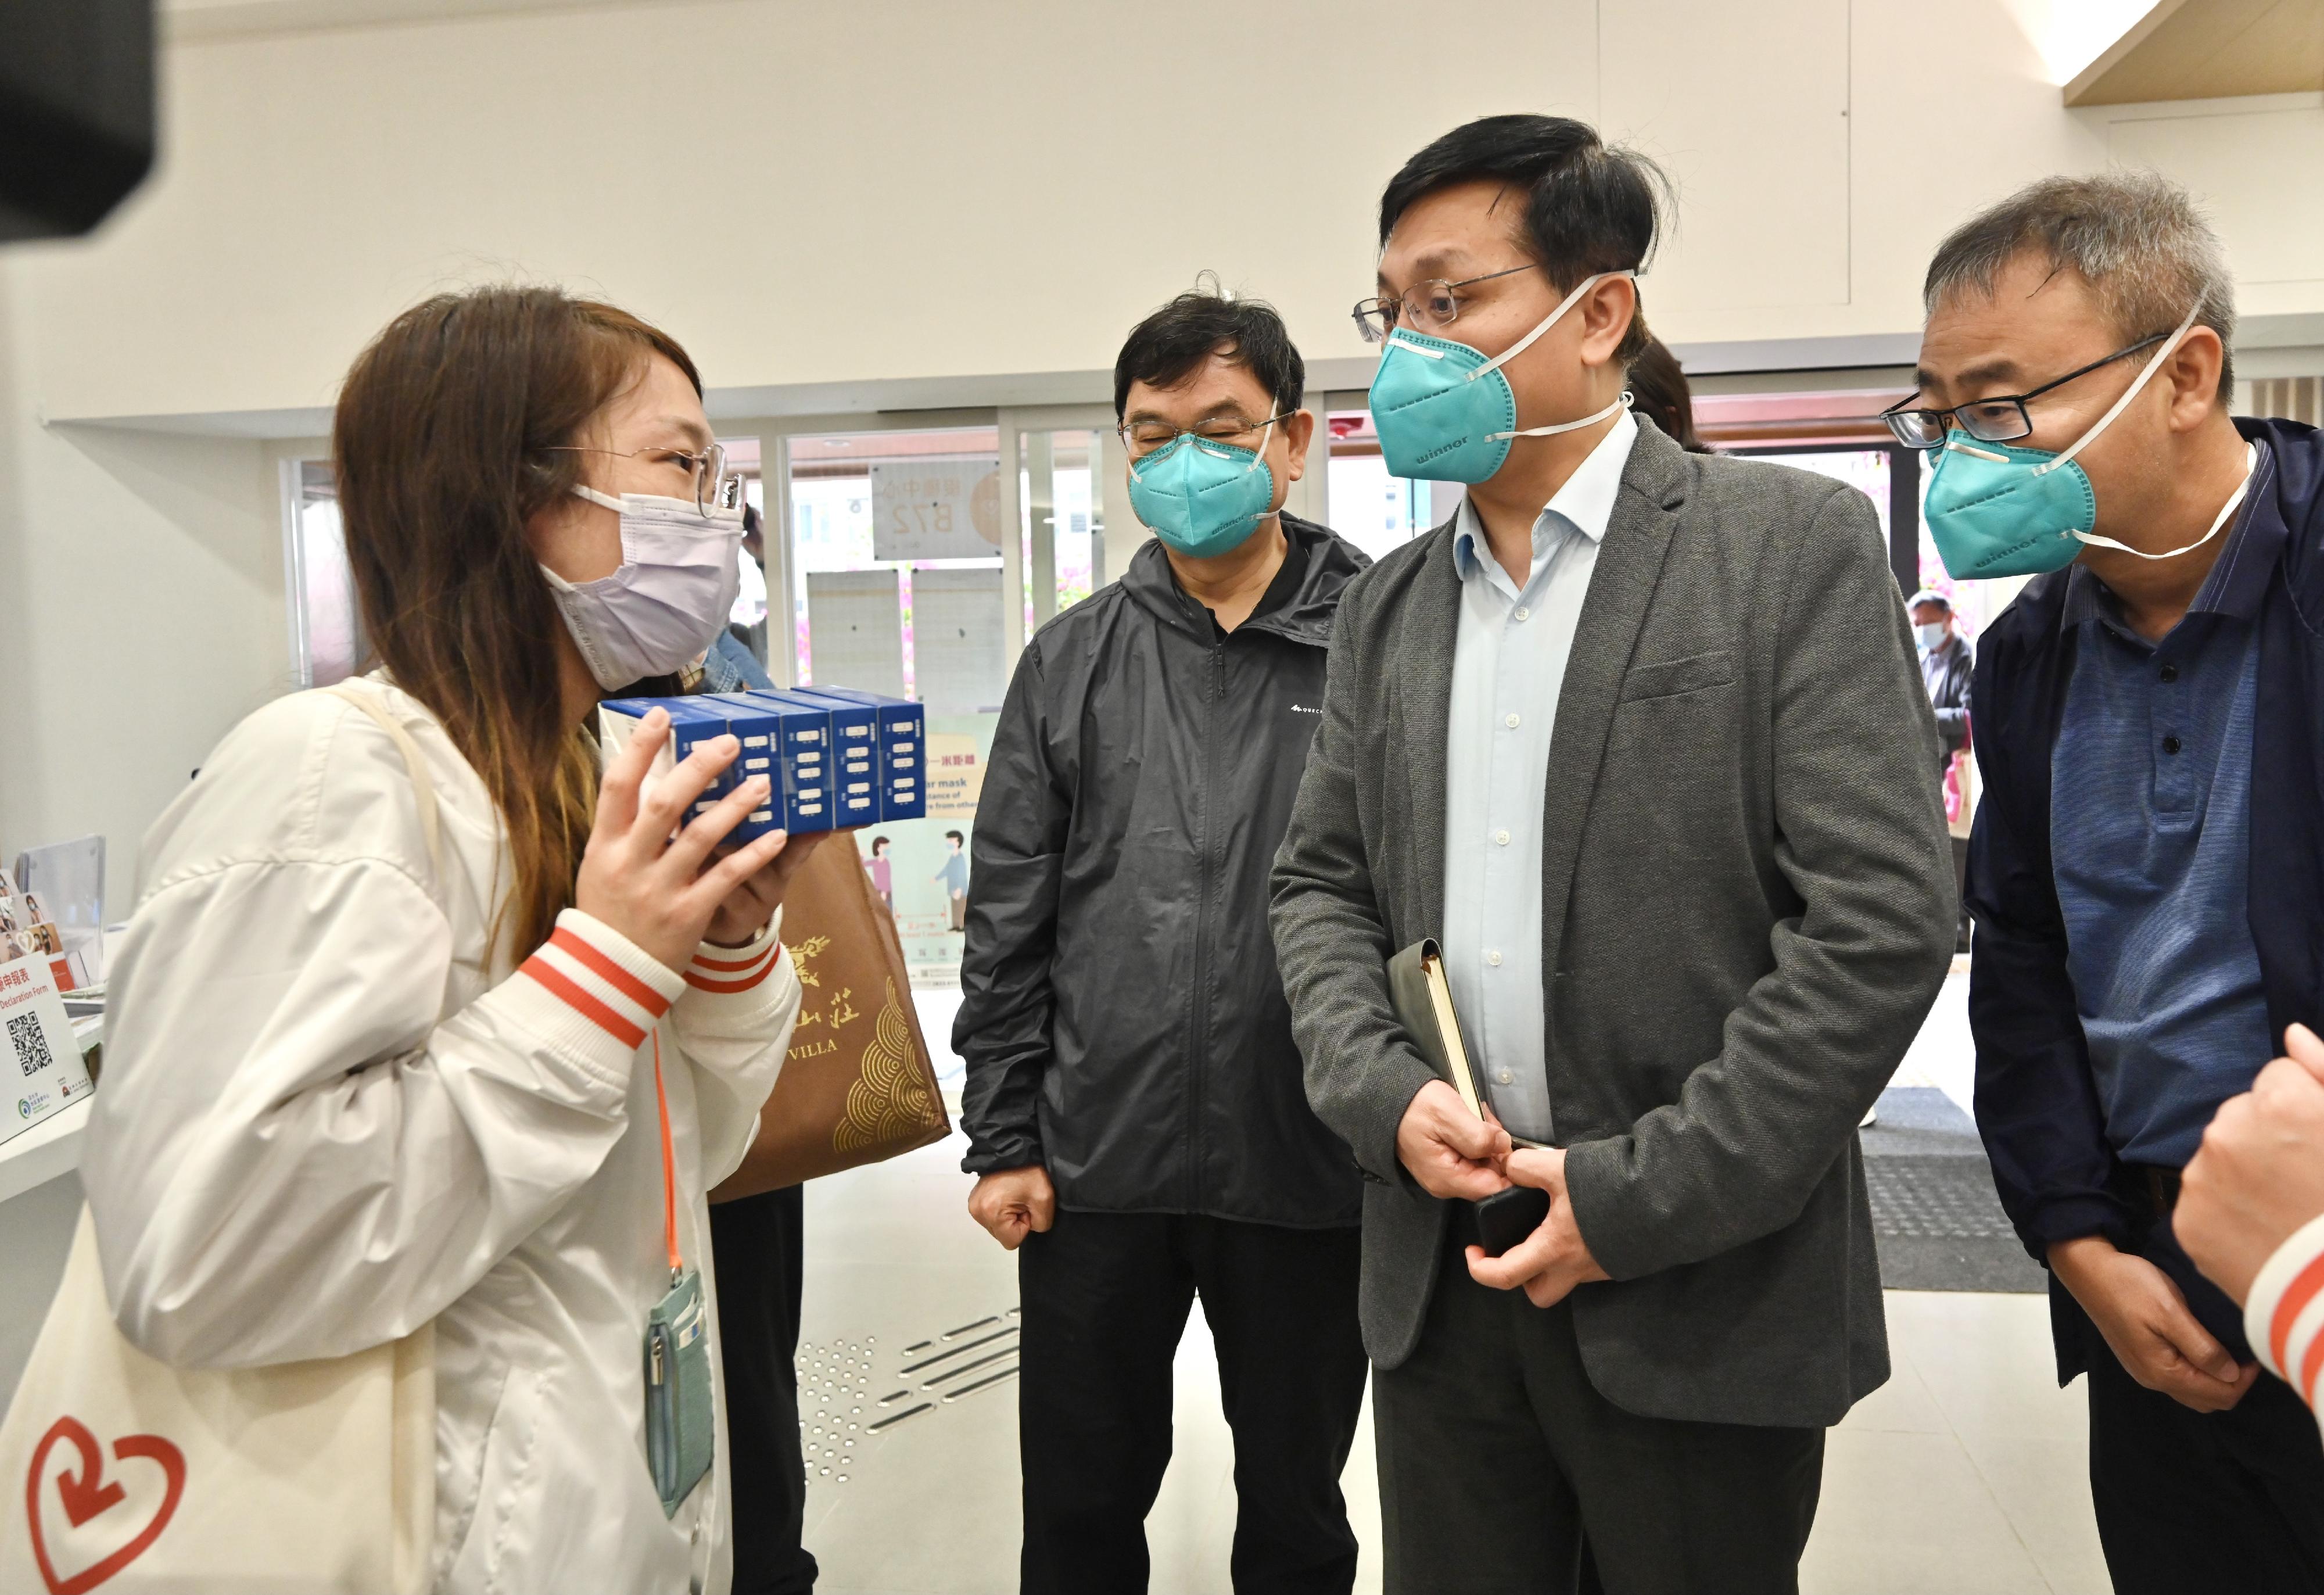 The Mainland epidemic prevention and control expert delegation deployed by the Central Authorities visited the Sham Shui Po District Health Centre (DHC) today (April 19). Photo shows a staff member of the DHC introducing the arrangement of distributing free rapid antigen test kits to the elderly, which began today to encourage elderly people to conduct frequent testing for health monitoring.